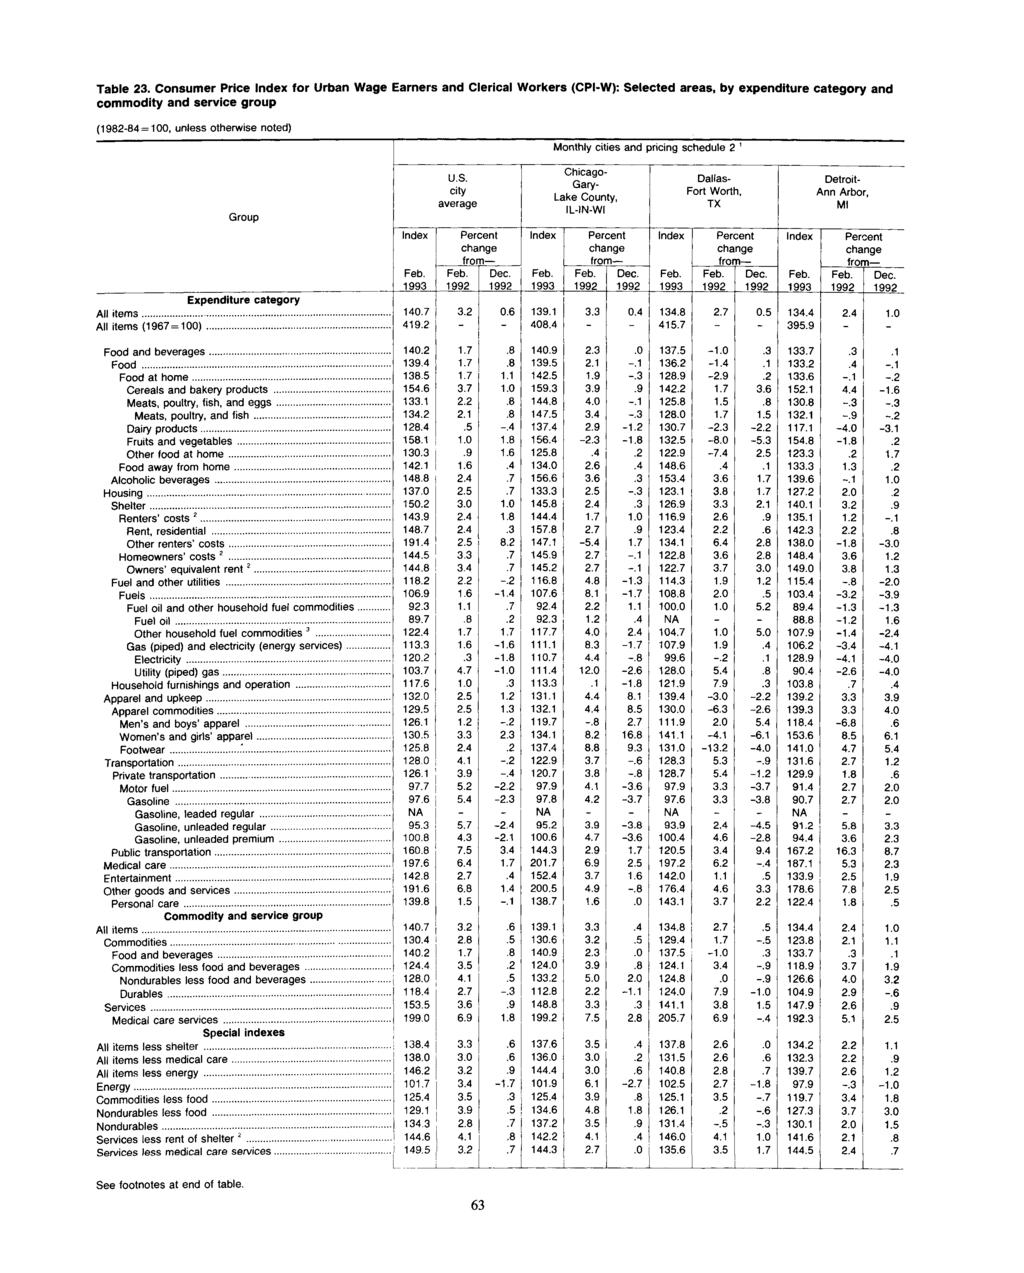 Table 23. Consumer Price for Urban Wage Earners and Clerical Workers (CPI-W): Selected areas, by expenditure category and commodity and service group Group U.S. city average Dec.